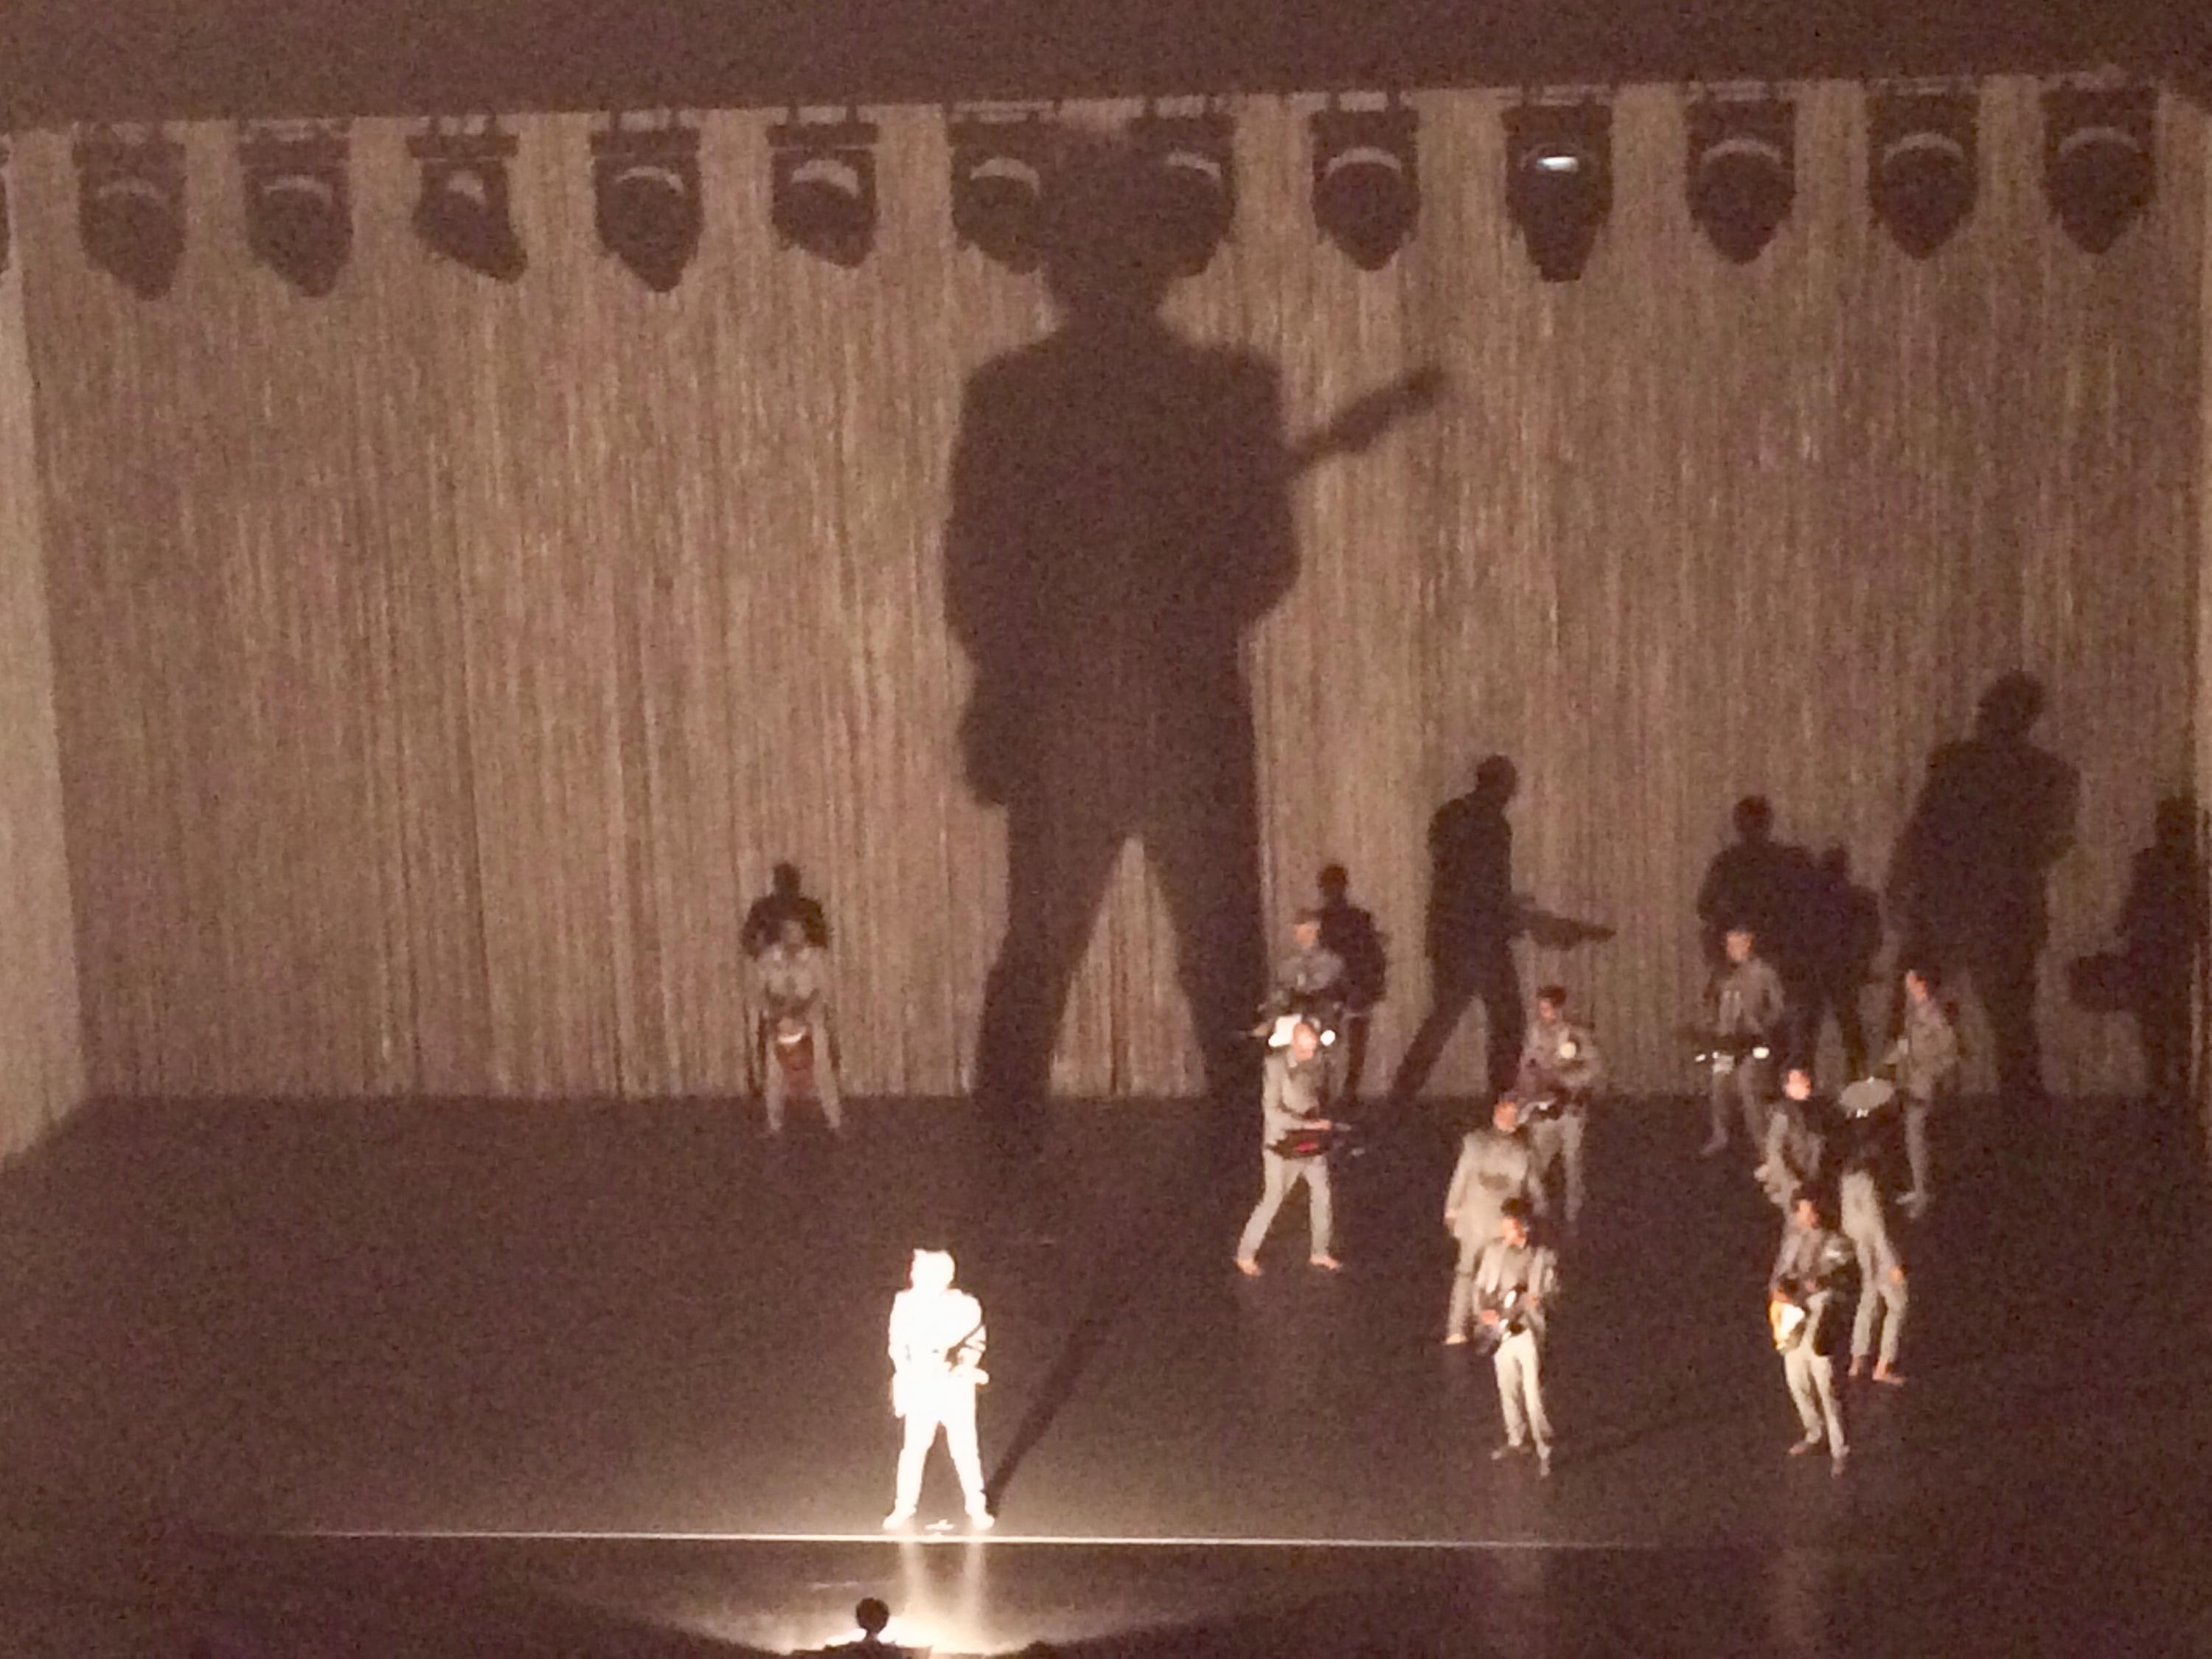 David Byrne at the Sony Centre